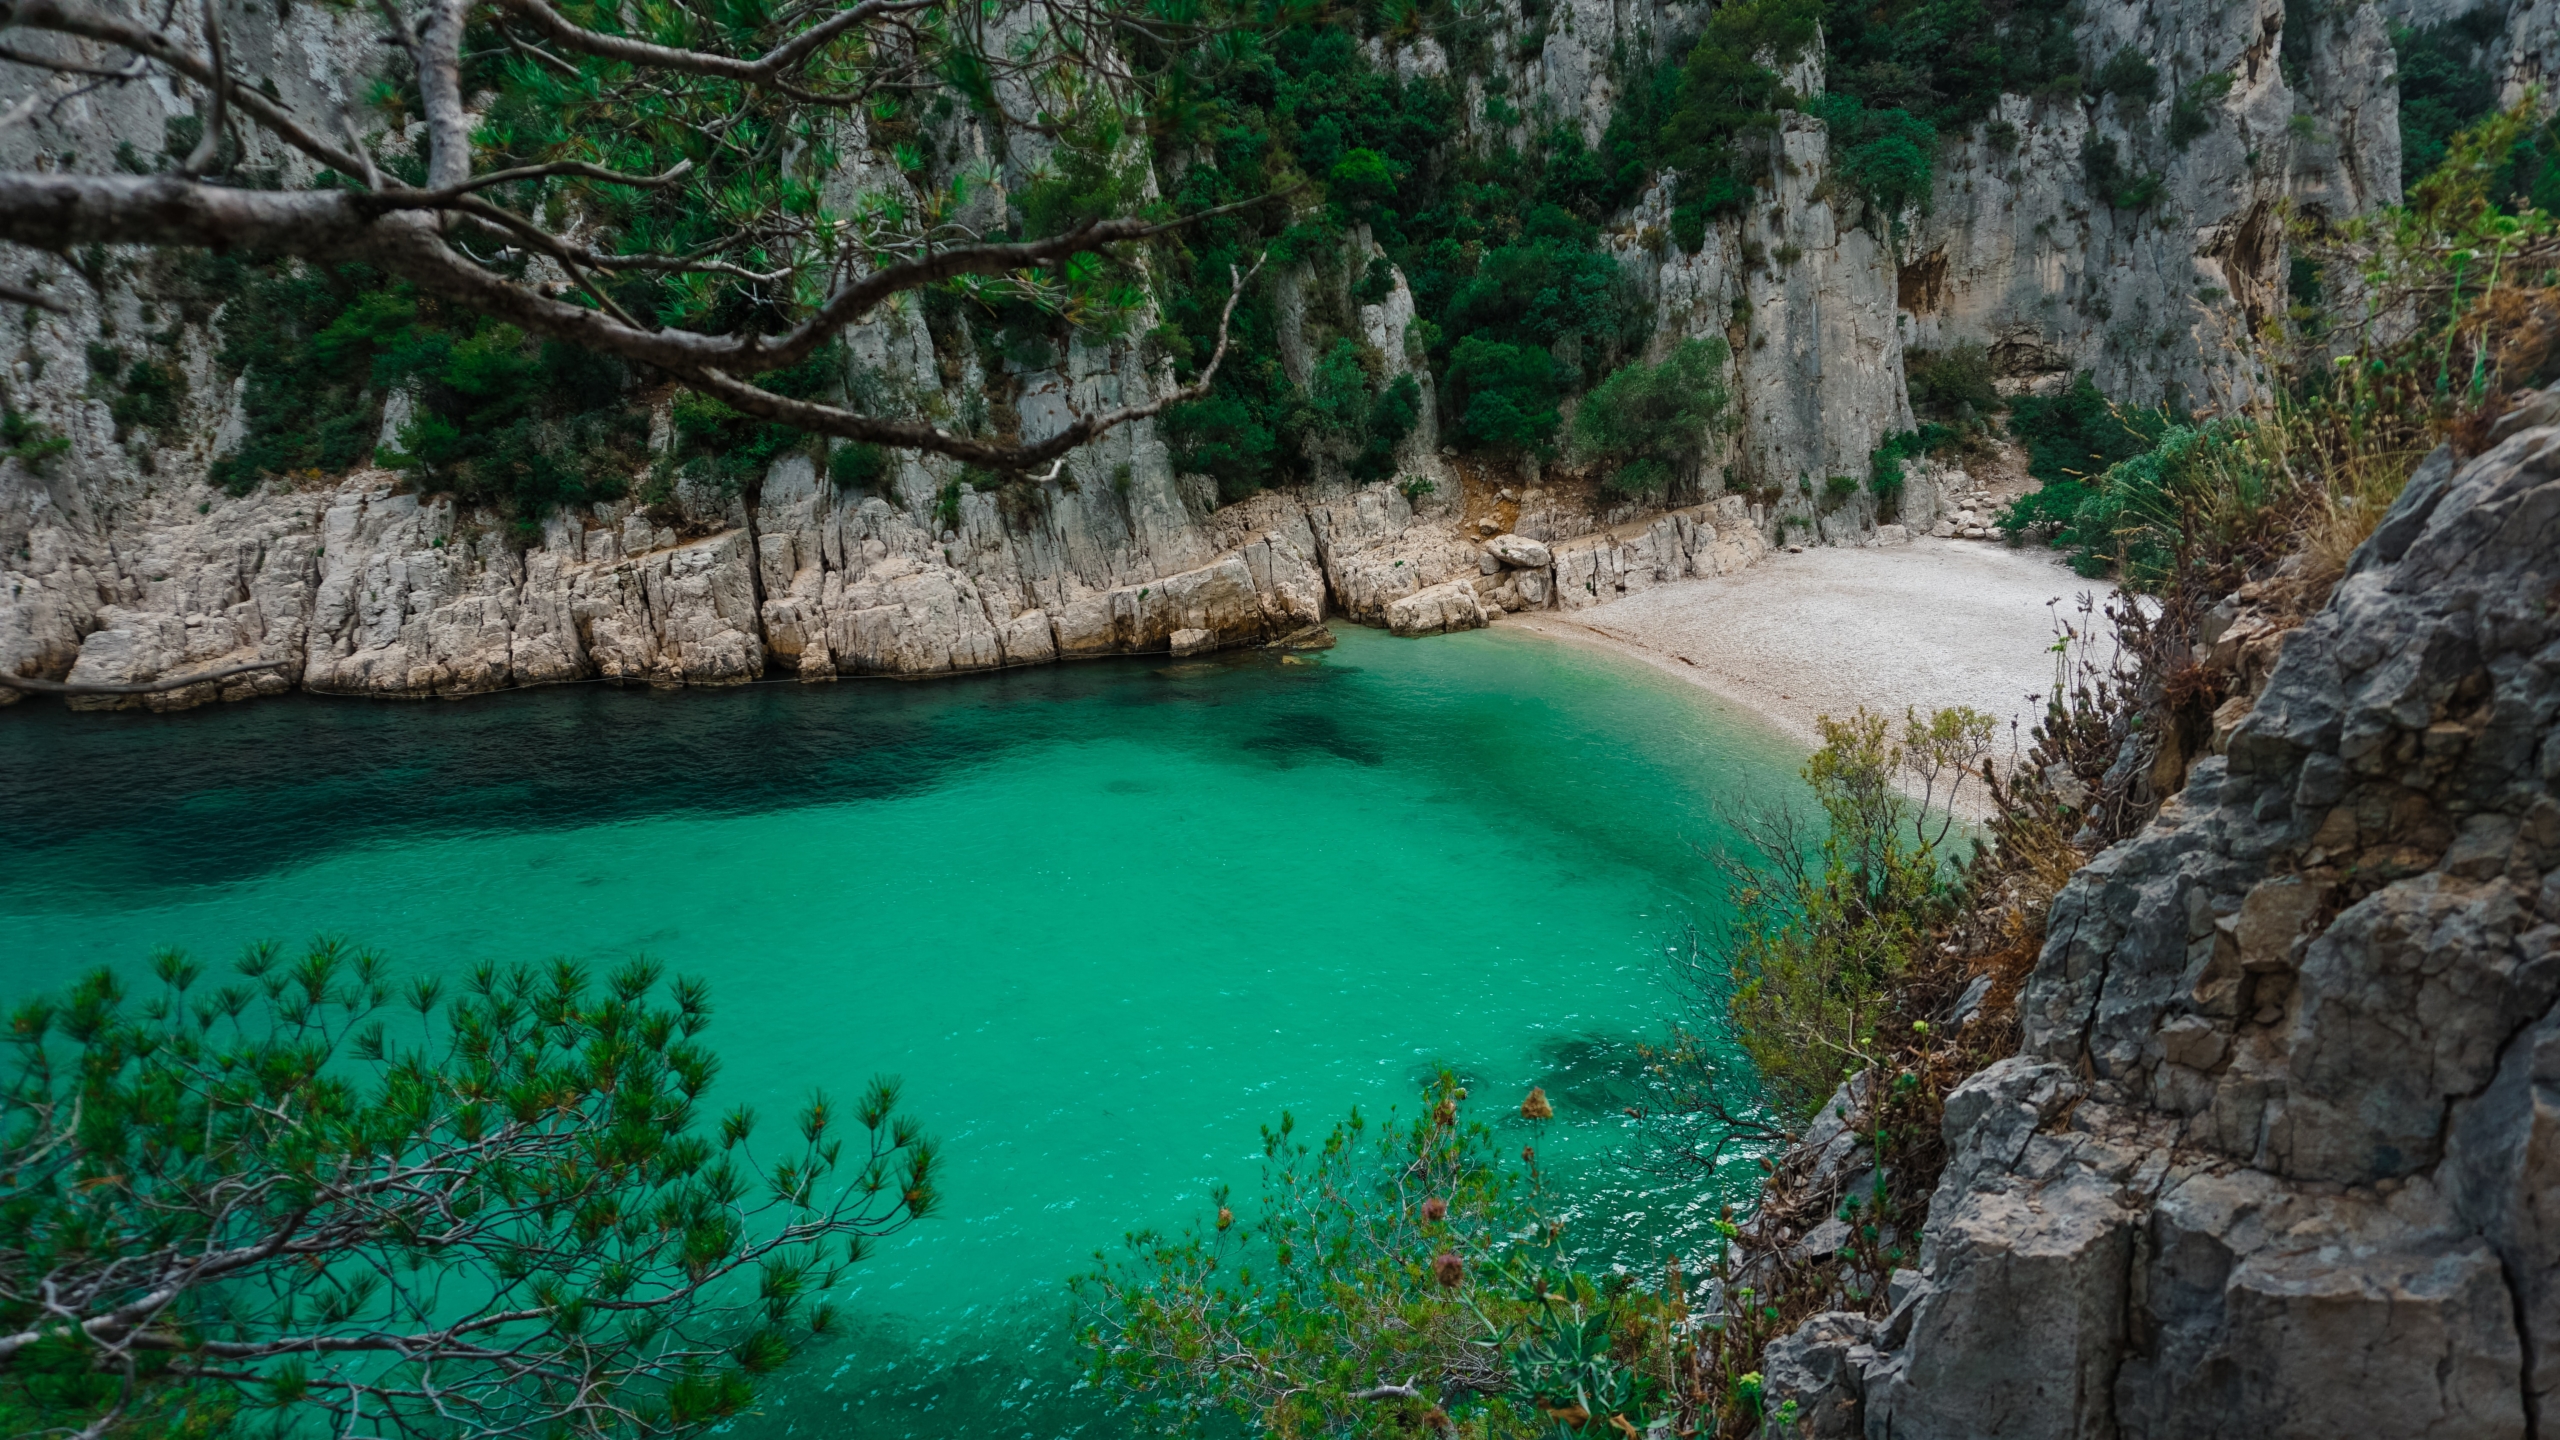 VIew of a secluded bay with green water in Cassis, South of France